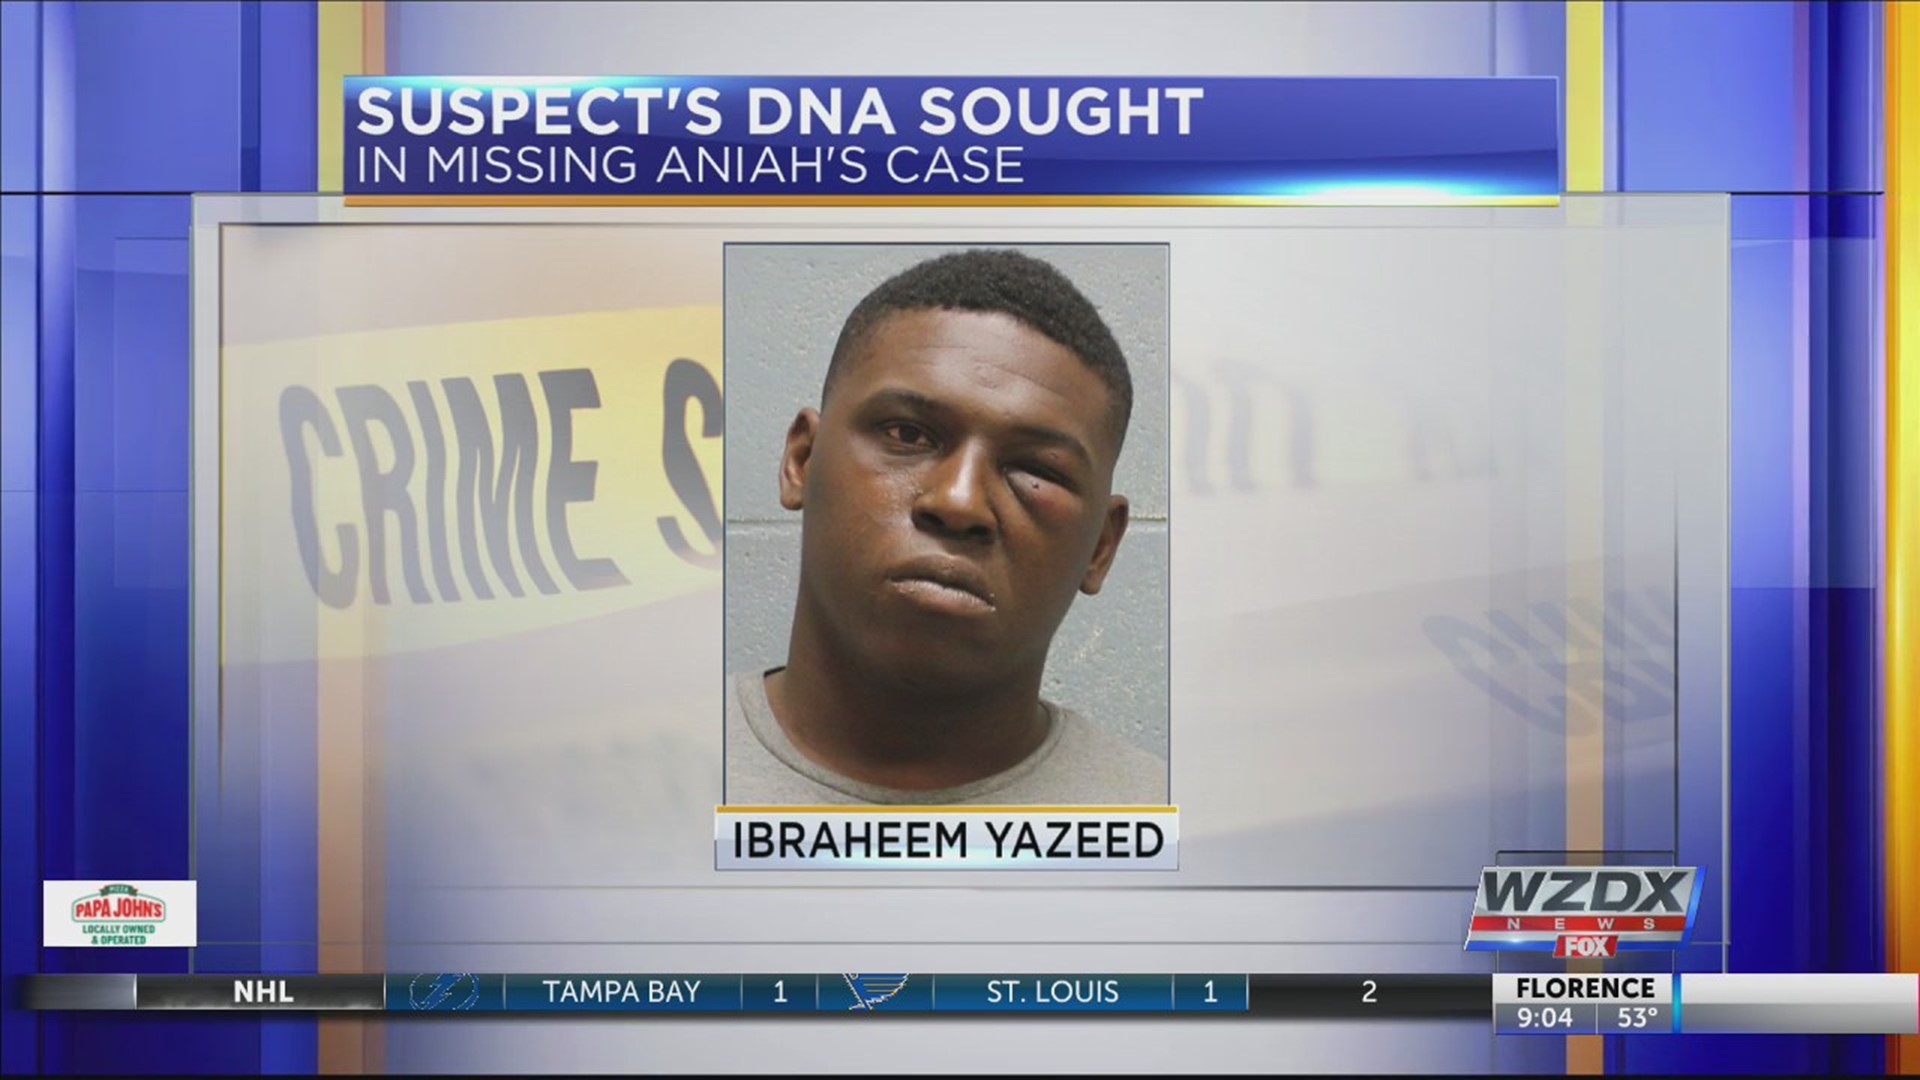 Prosecutors on Tuesday filed a motion seeking permission to take a DNA sample from Ibraheem Yazeed.